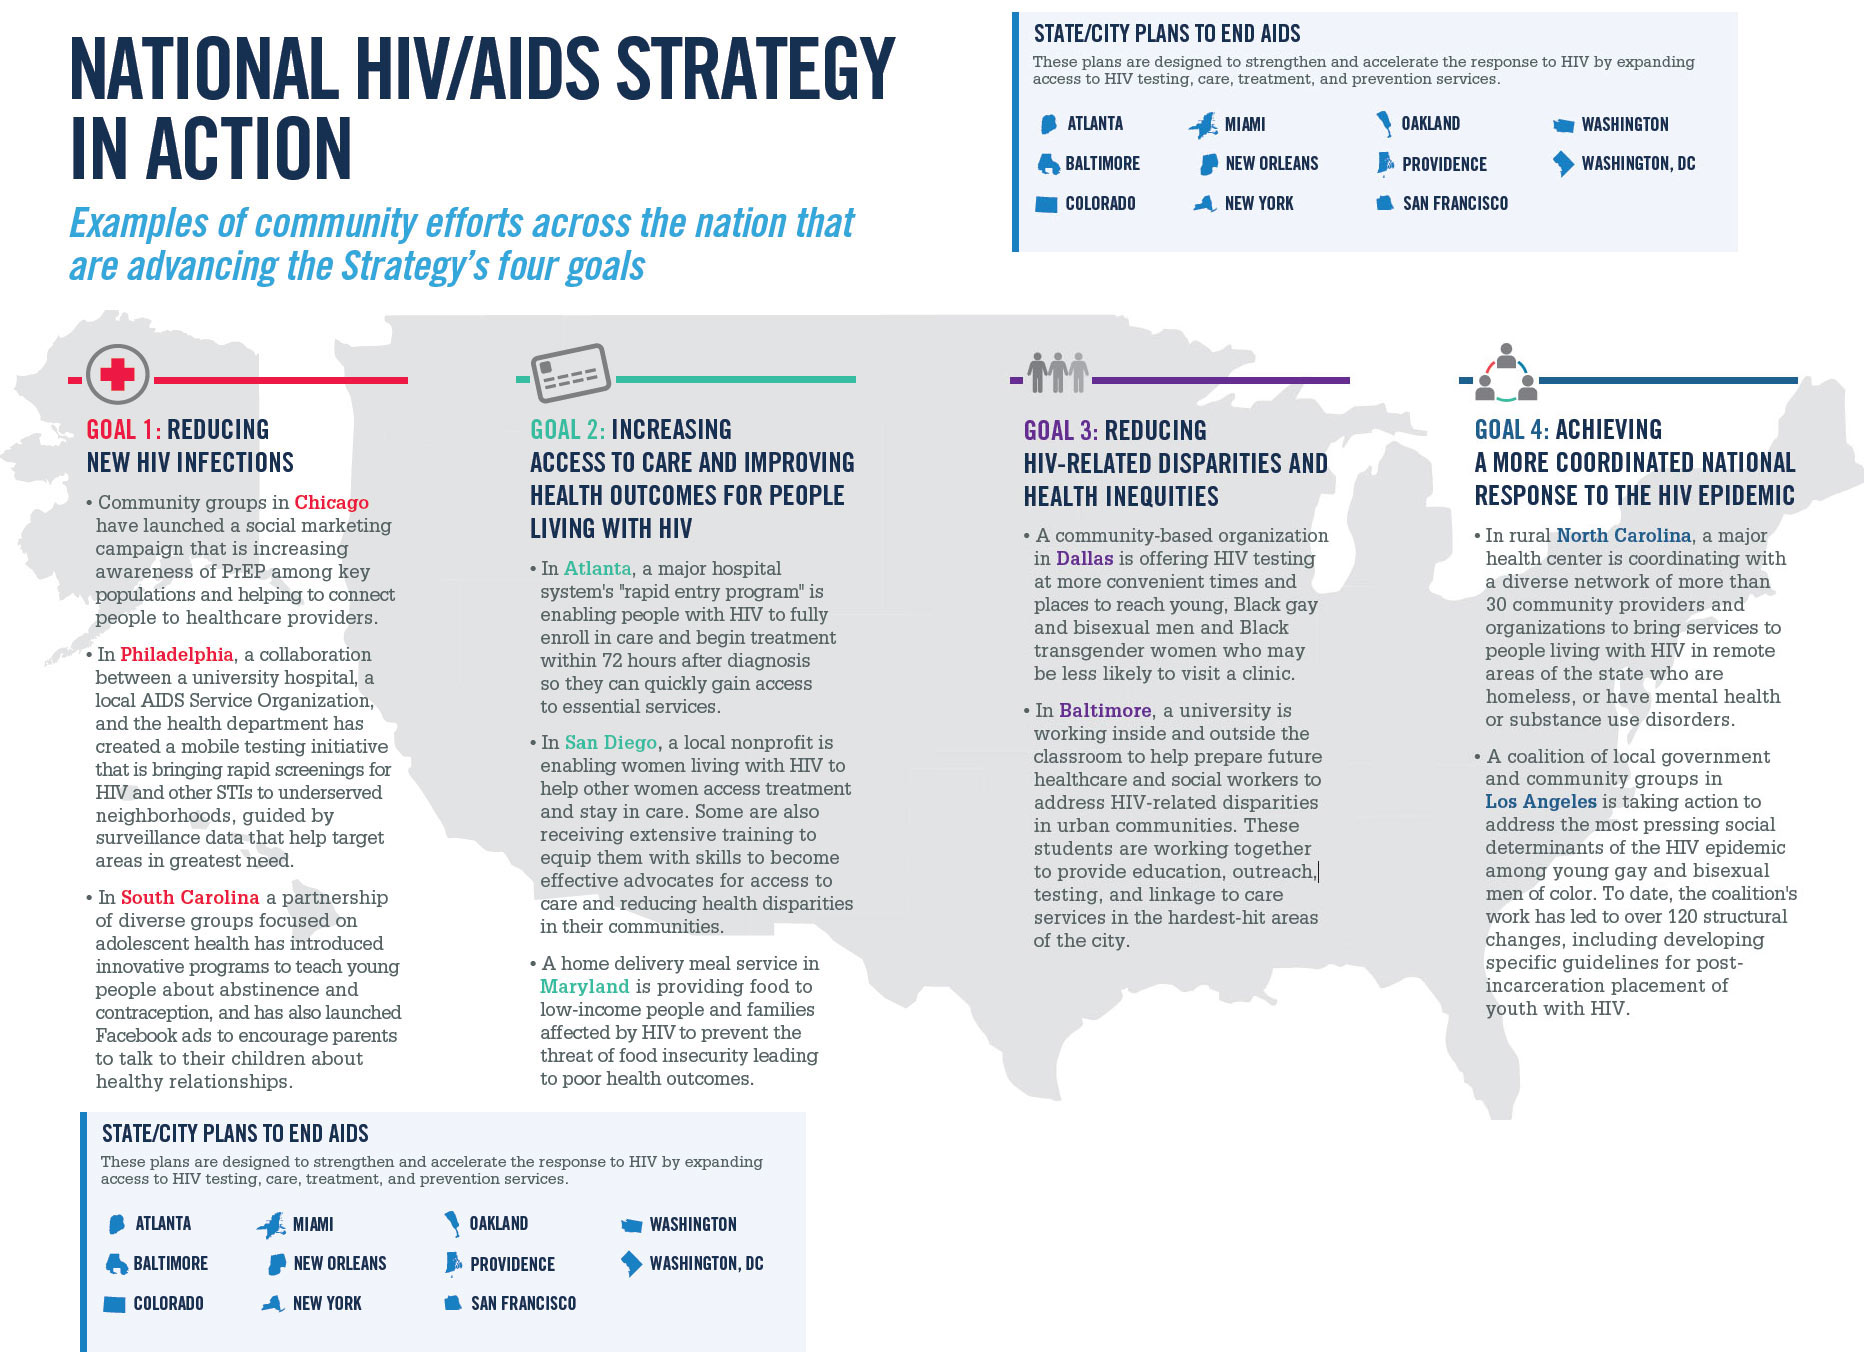 National HIV/AIDS Strategy in Action